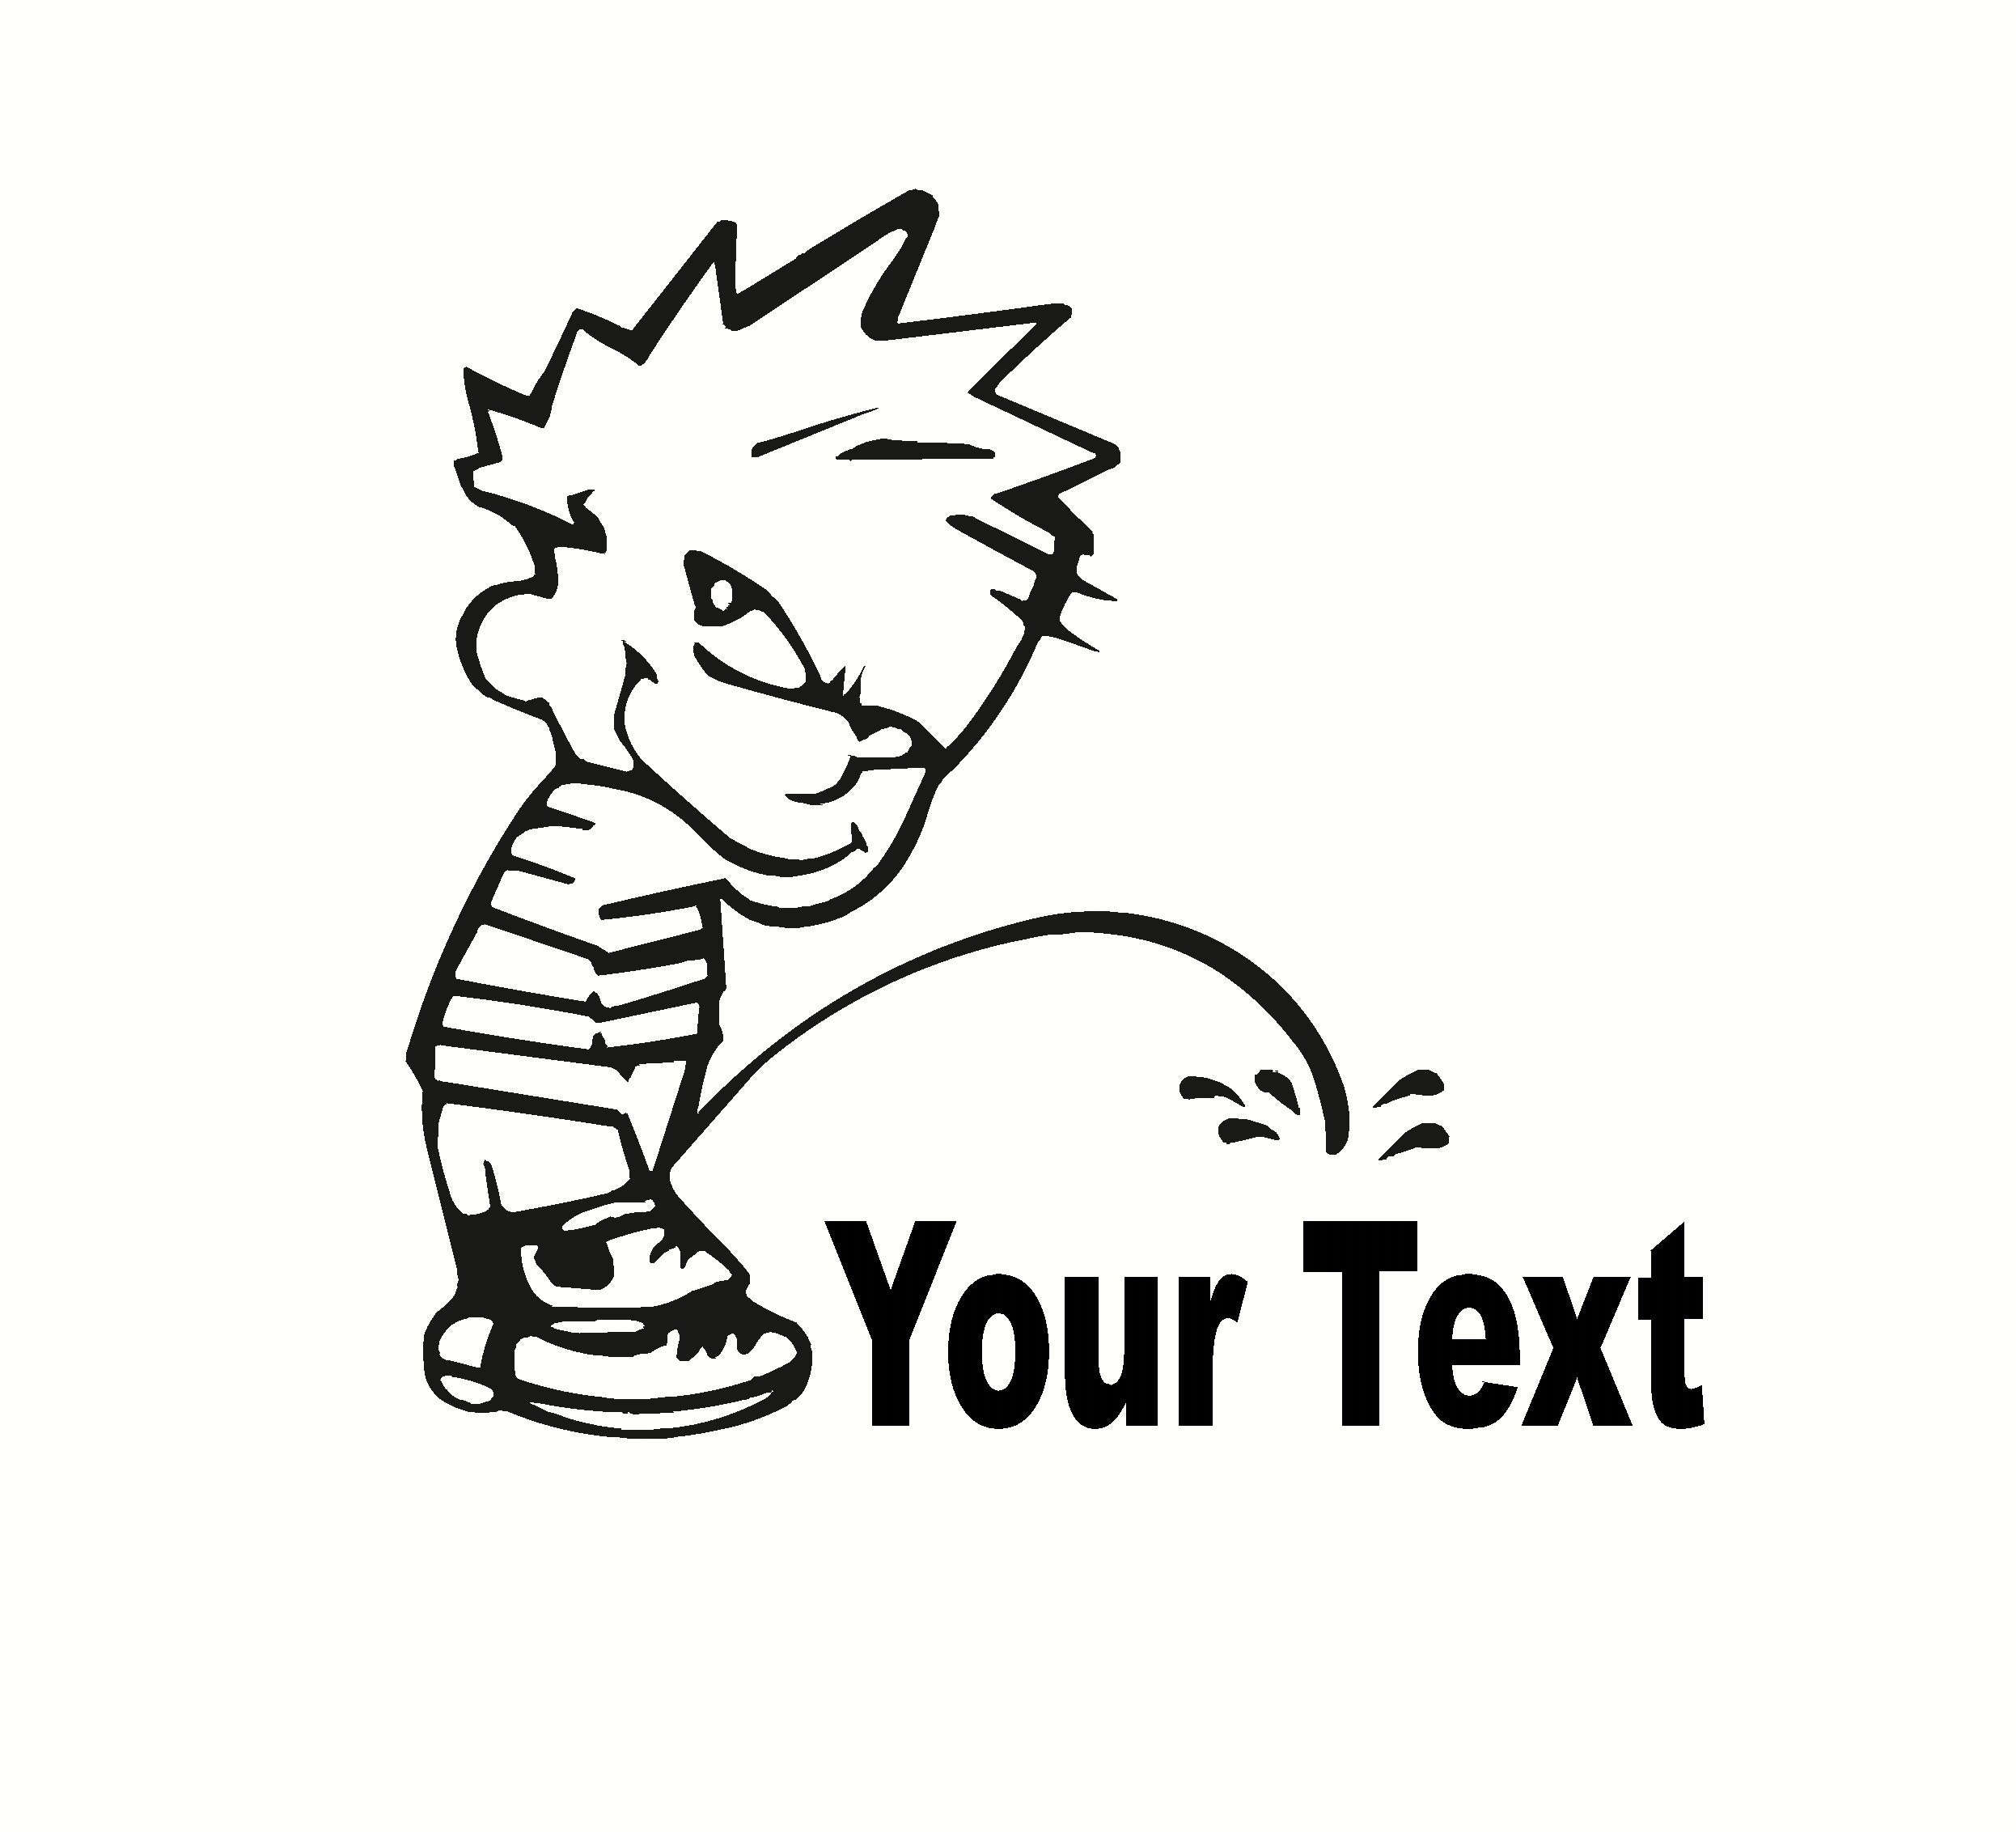 Calvin Pee on Your Text Decal Sticker Vinyl